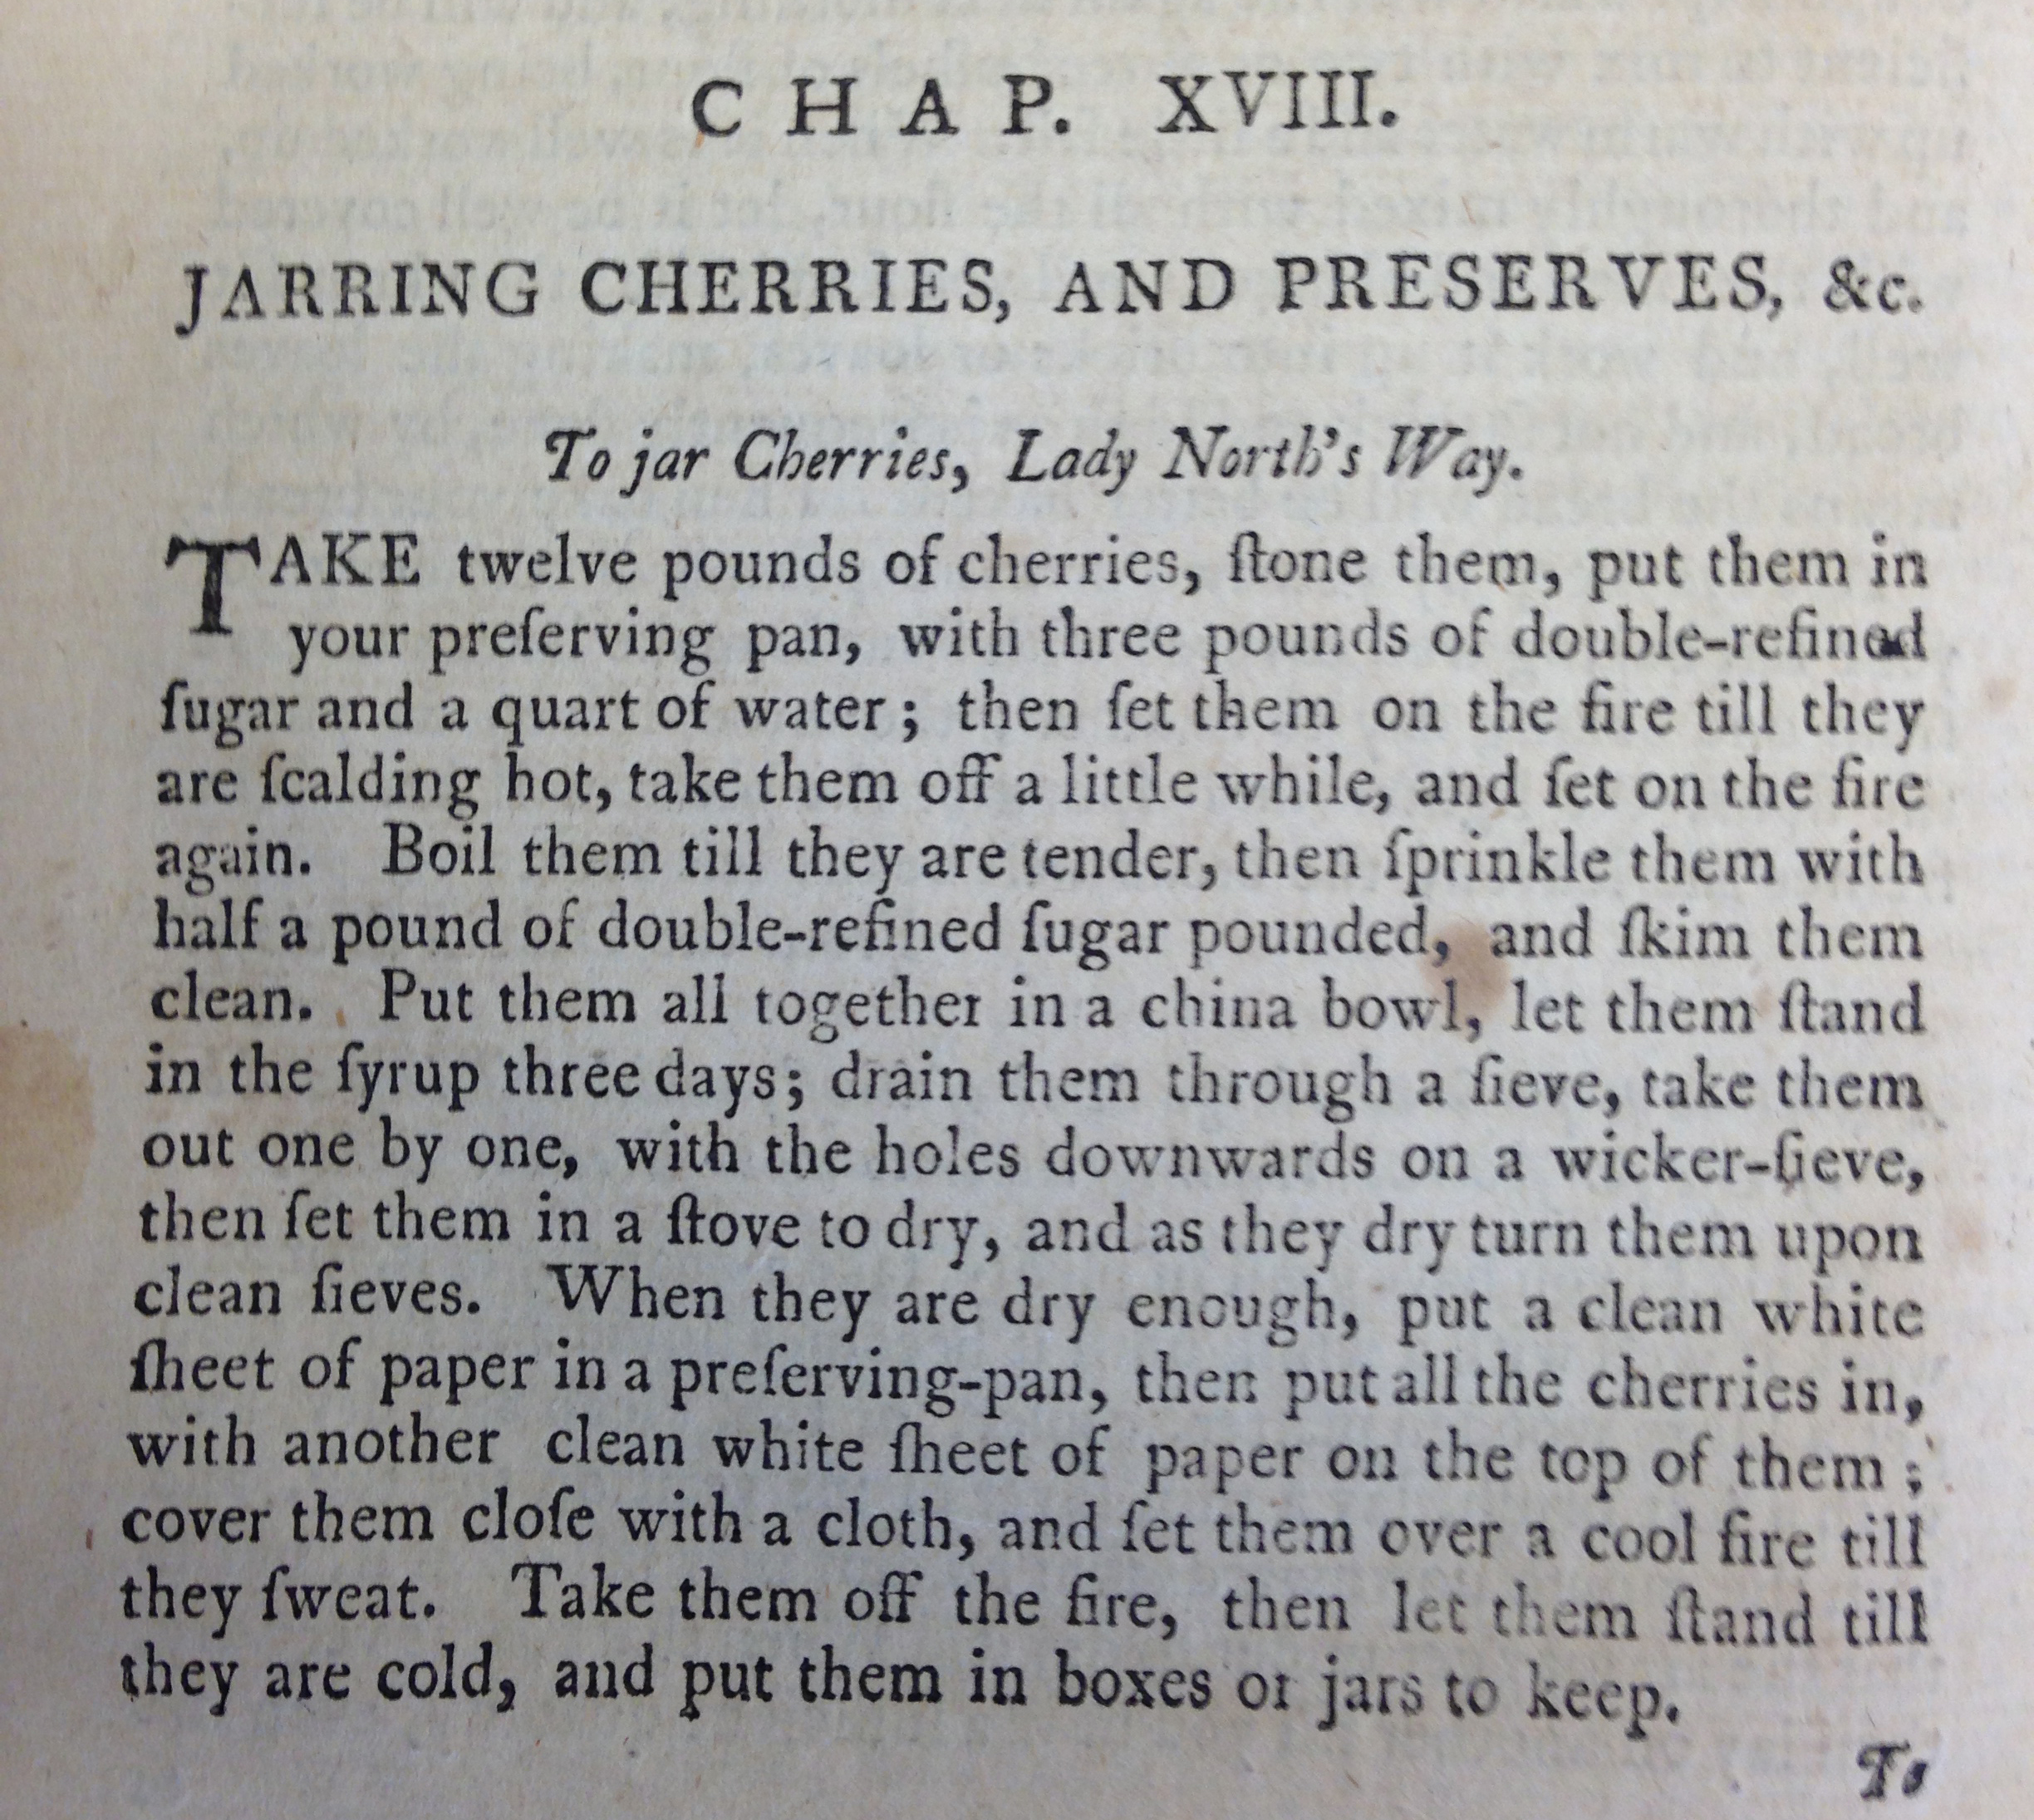 Recipe for "To jar cherries, Lady North's Way"